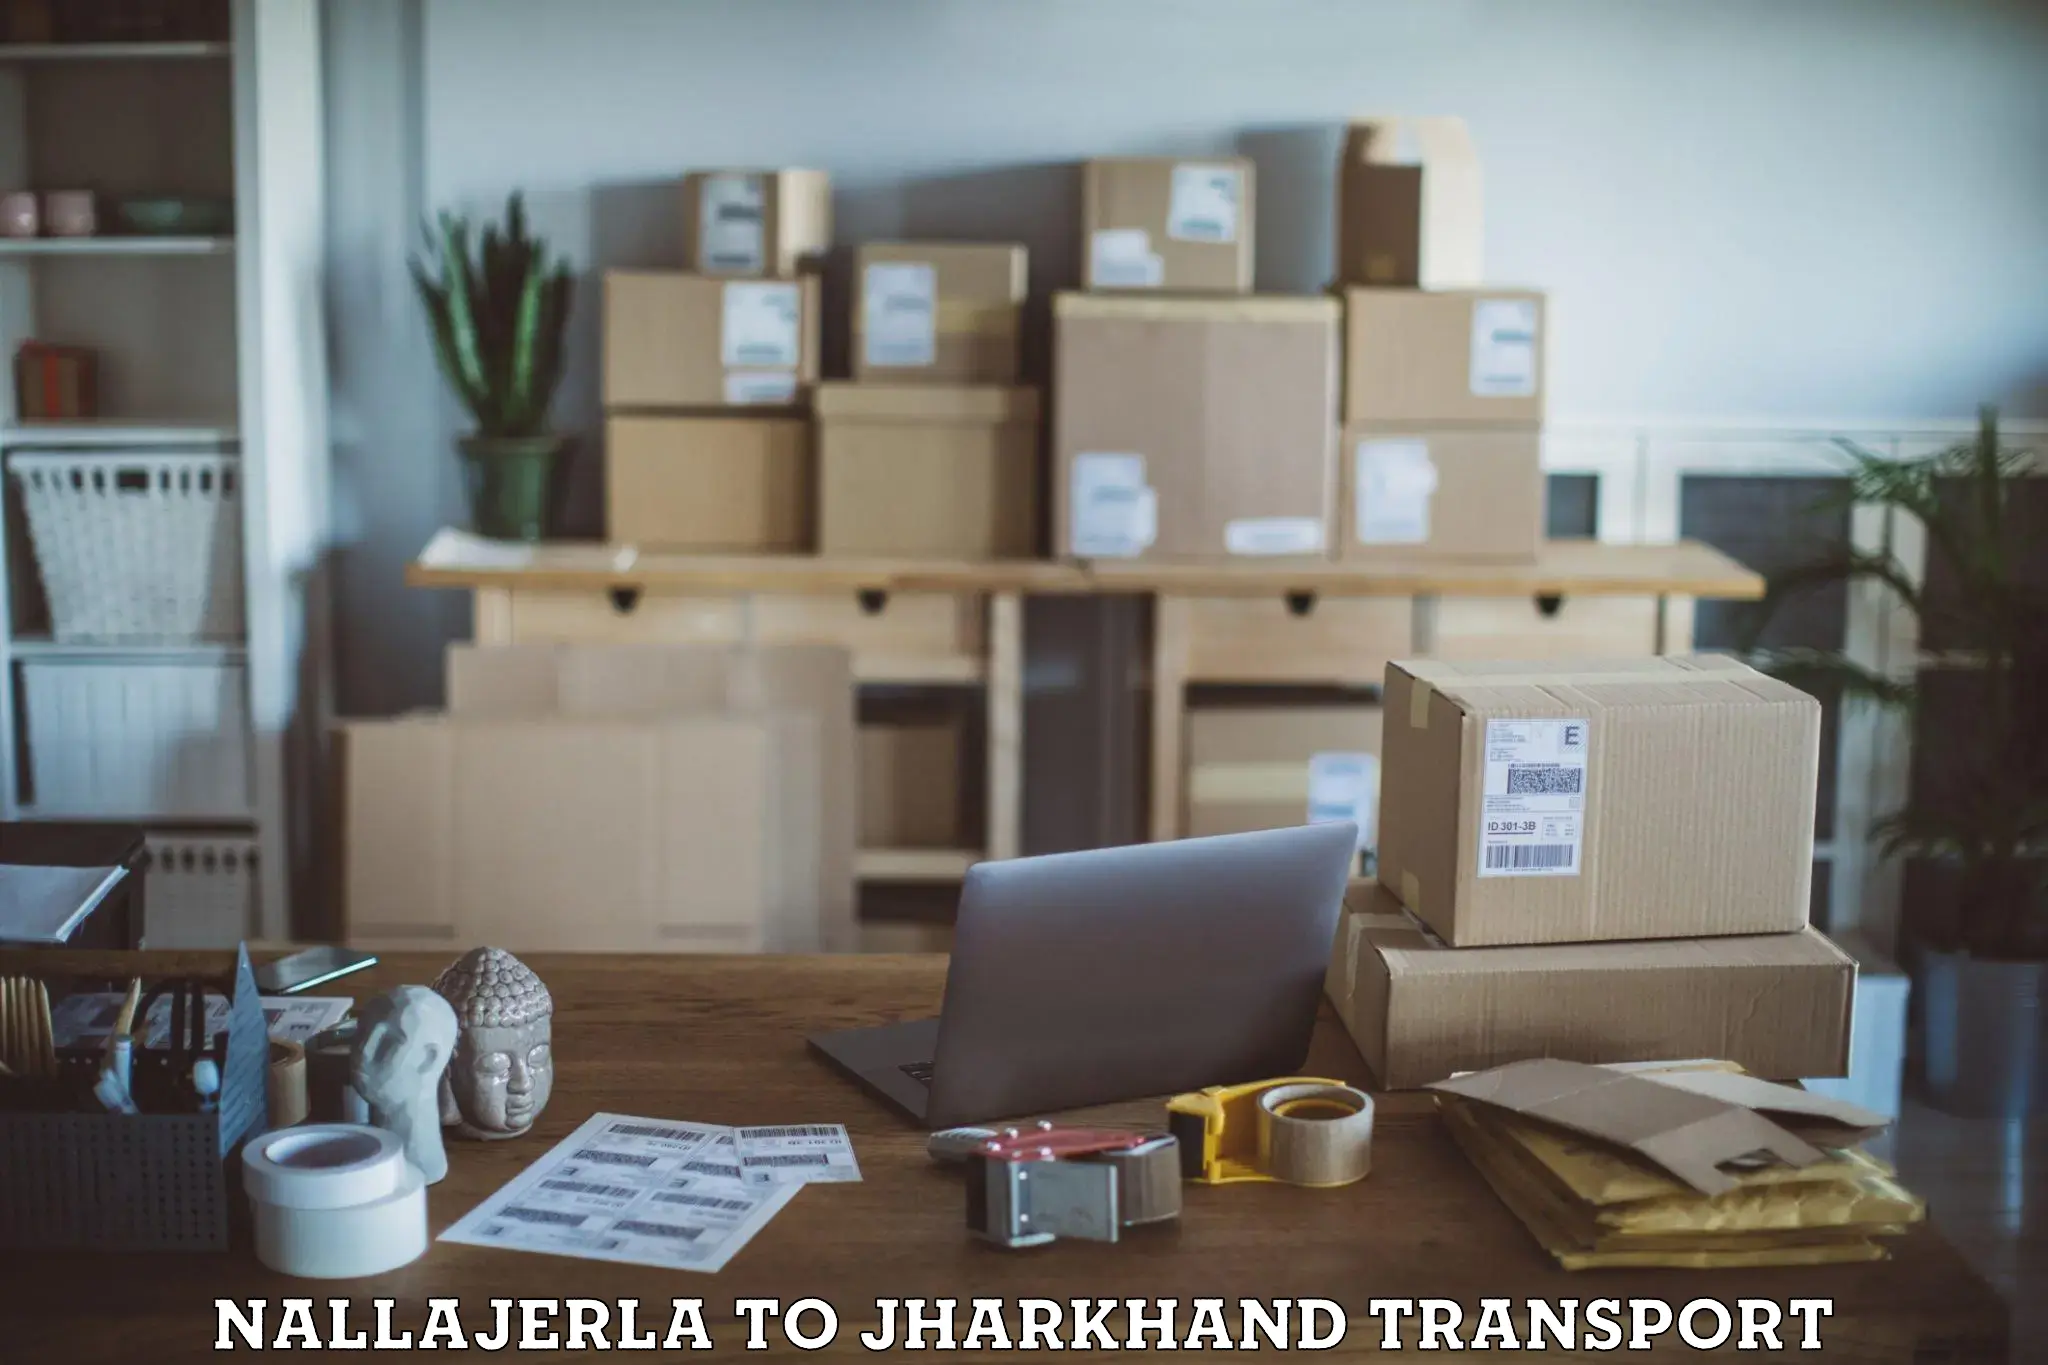 Air freight transport services Nallajerla to Jharkhand